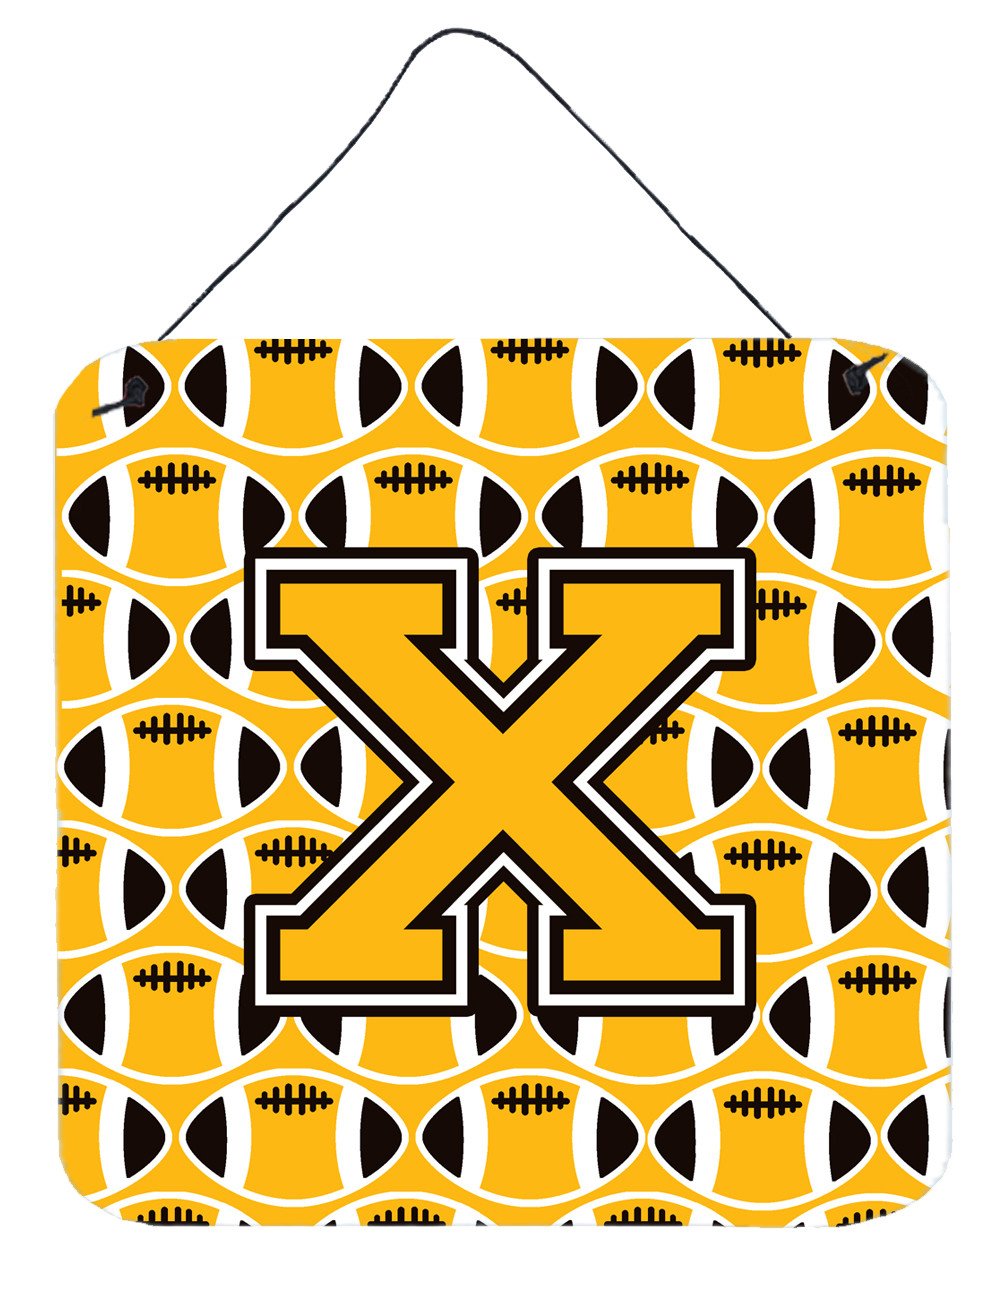 Letter X Football Black, Old Gold and White Wall or Door Hanging Prints CJ1080-XDS66 by Caroline's Treasures